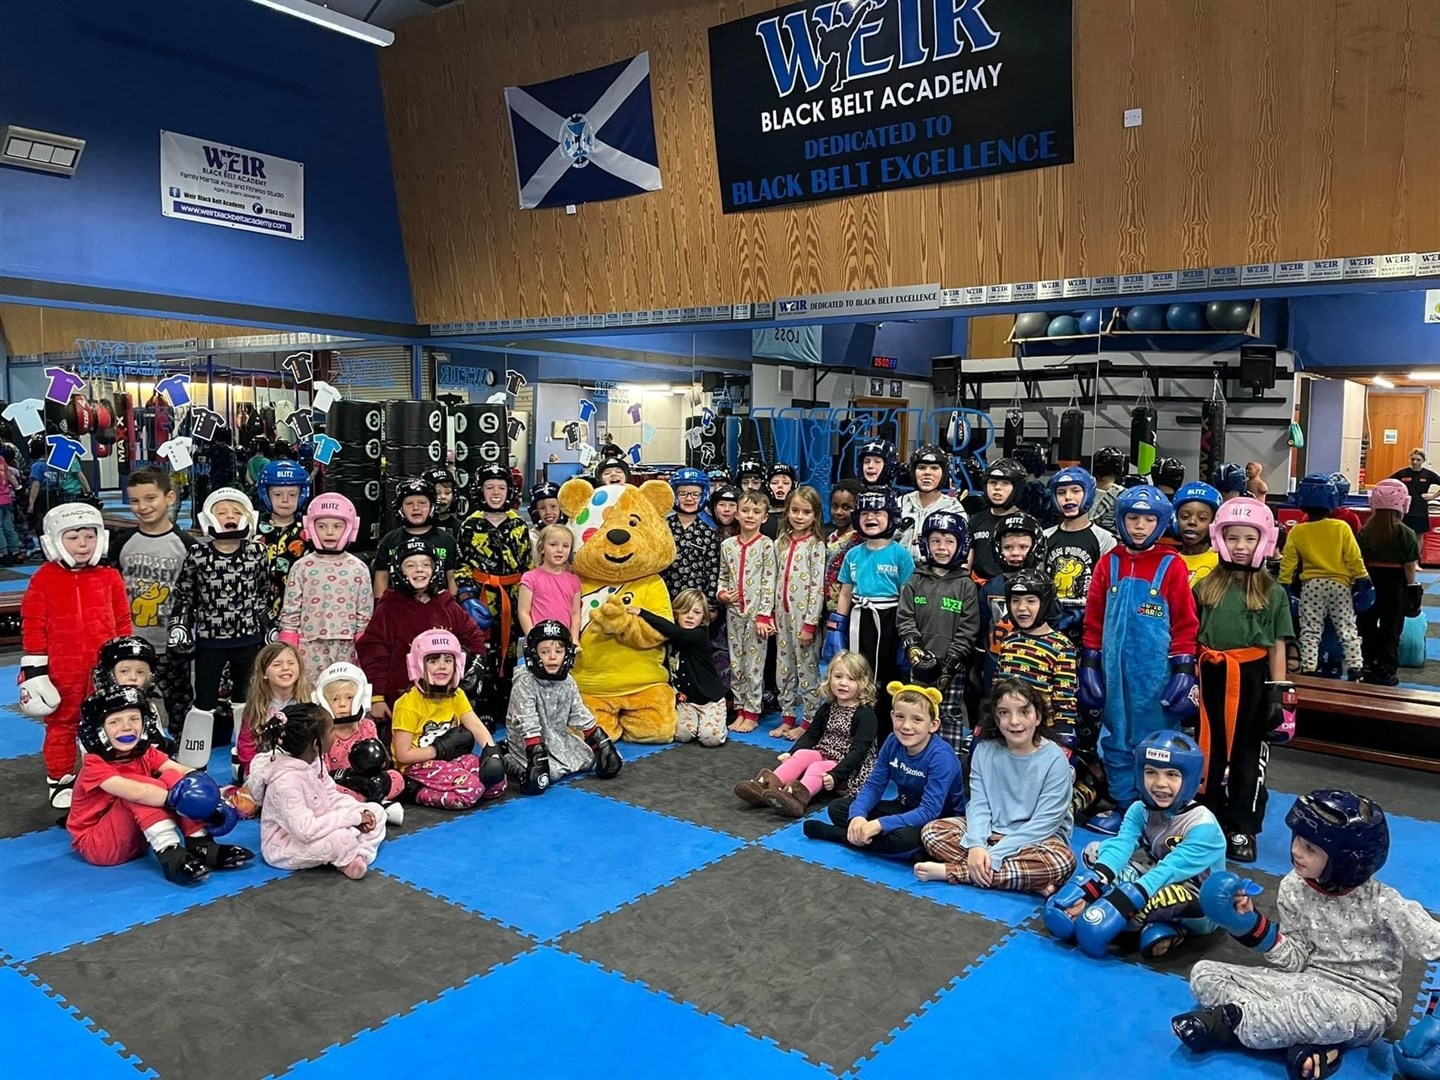 Pudsey paid a visit to Weir BBA, based at Edgar Road in Elgin.